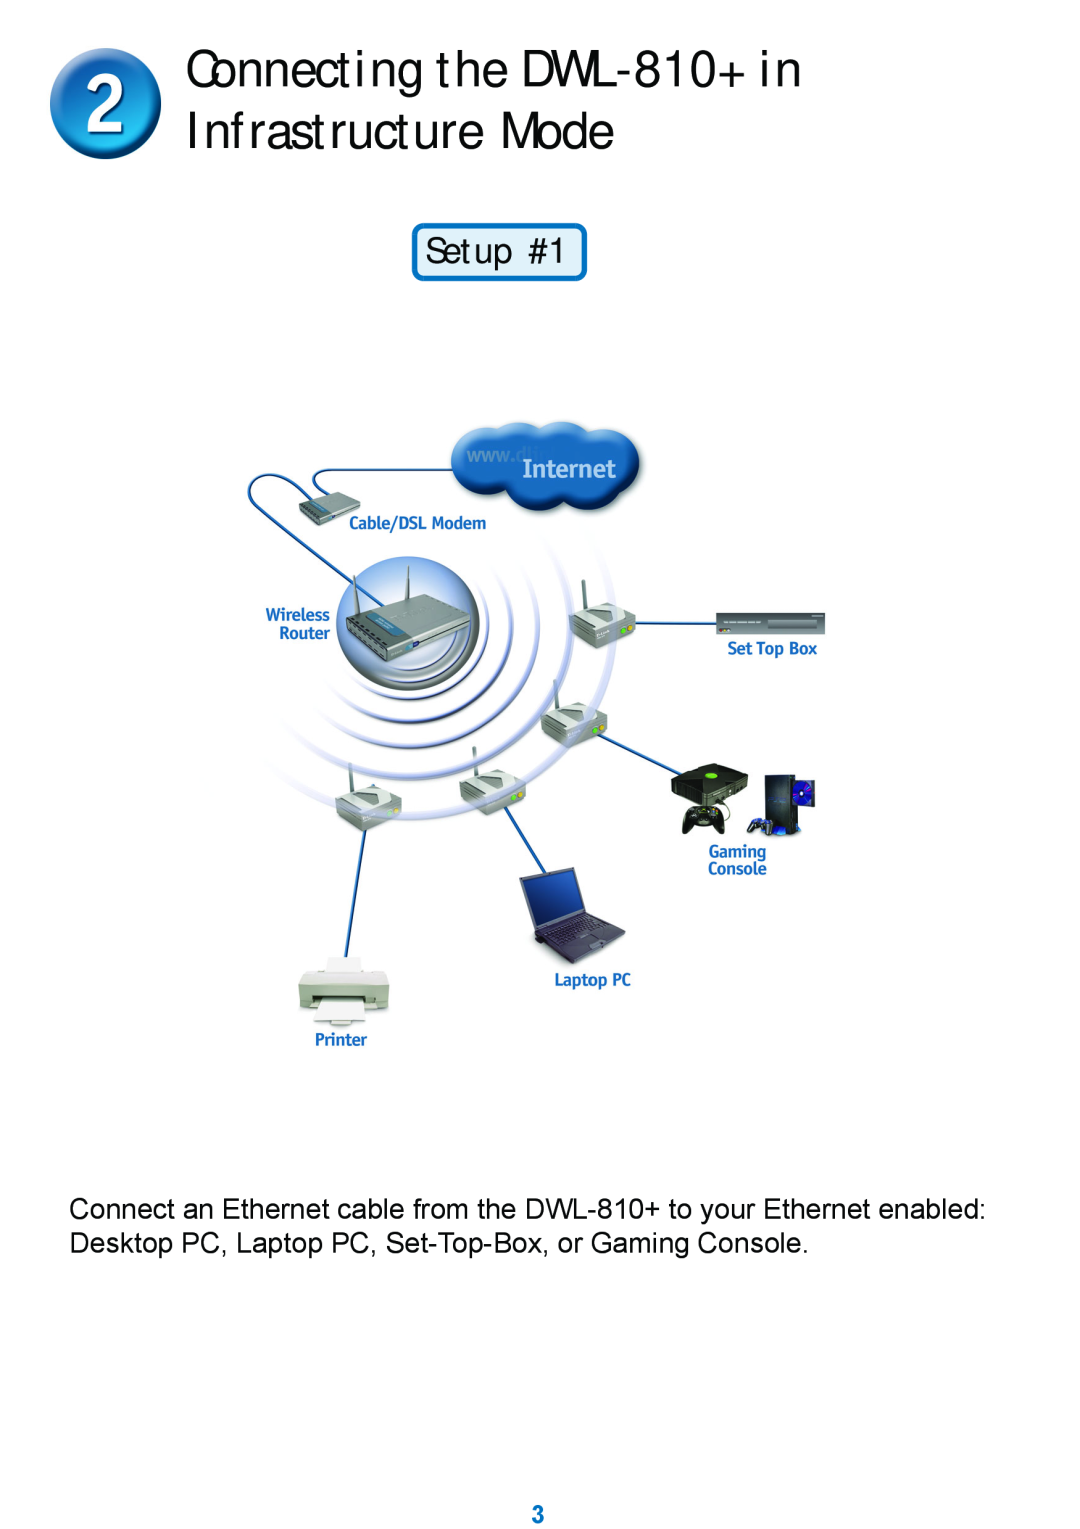 D-Link manual Connecting the DWL-810+ in Infrastructure Mode, Setup #1 